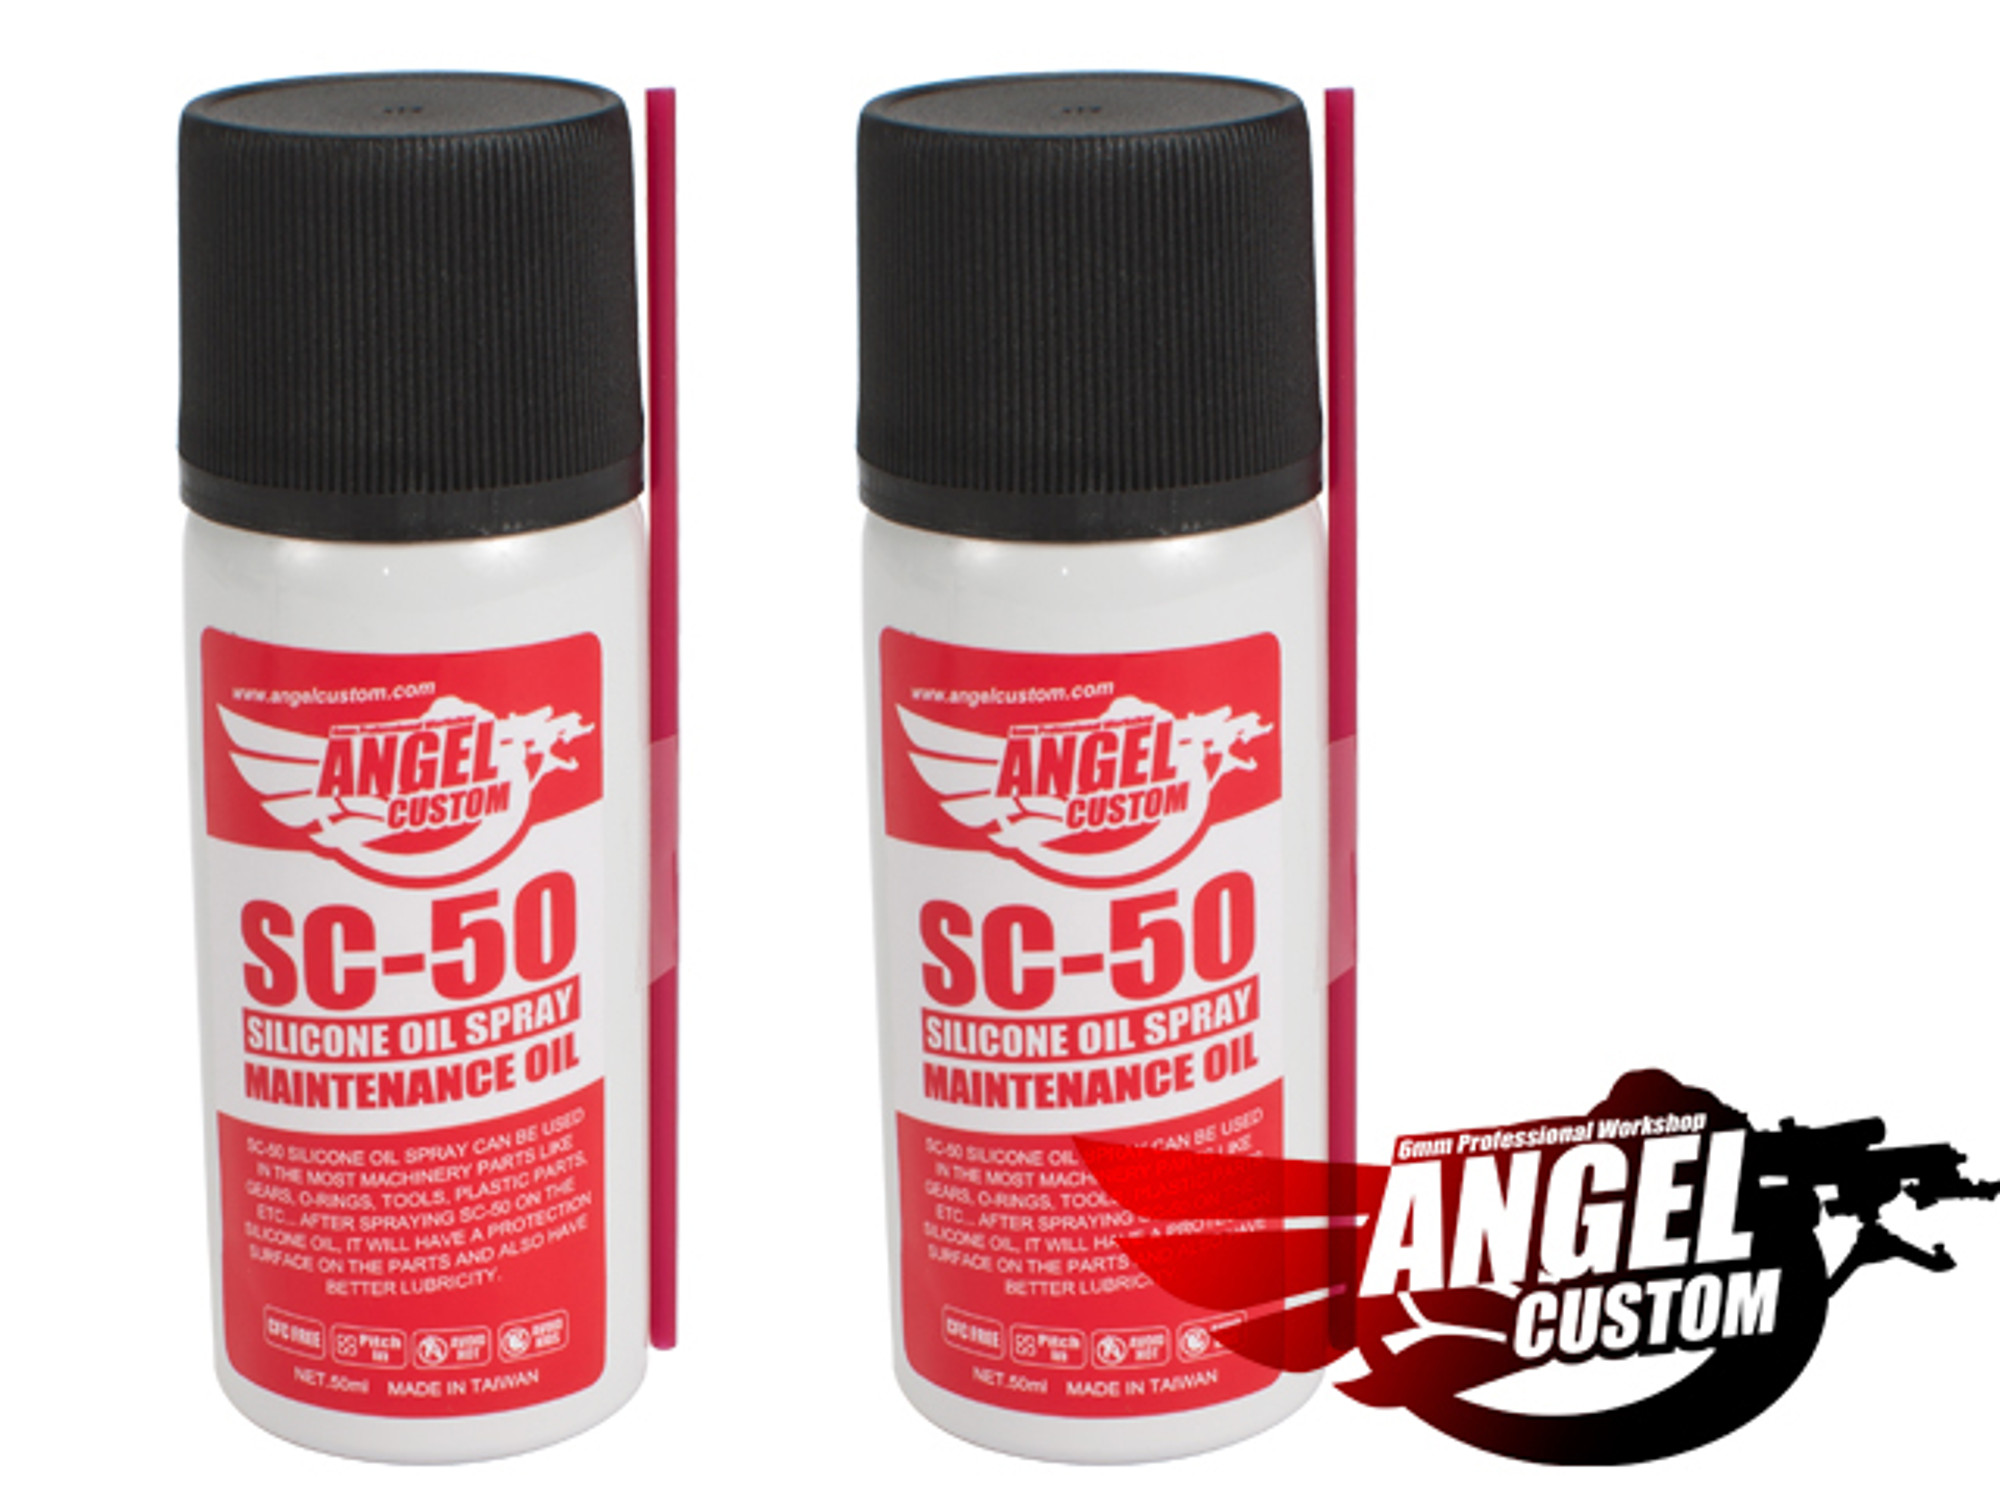 Angel Custom All Purpose Silicone Lubricant Oil Spray for Airsoft / Firearm (Two Pack)